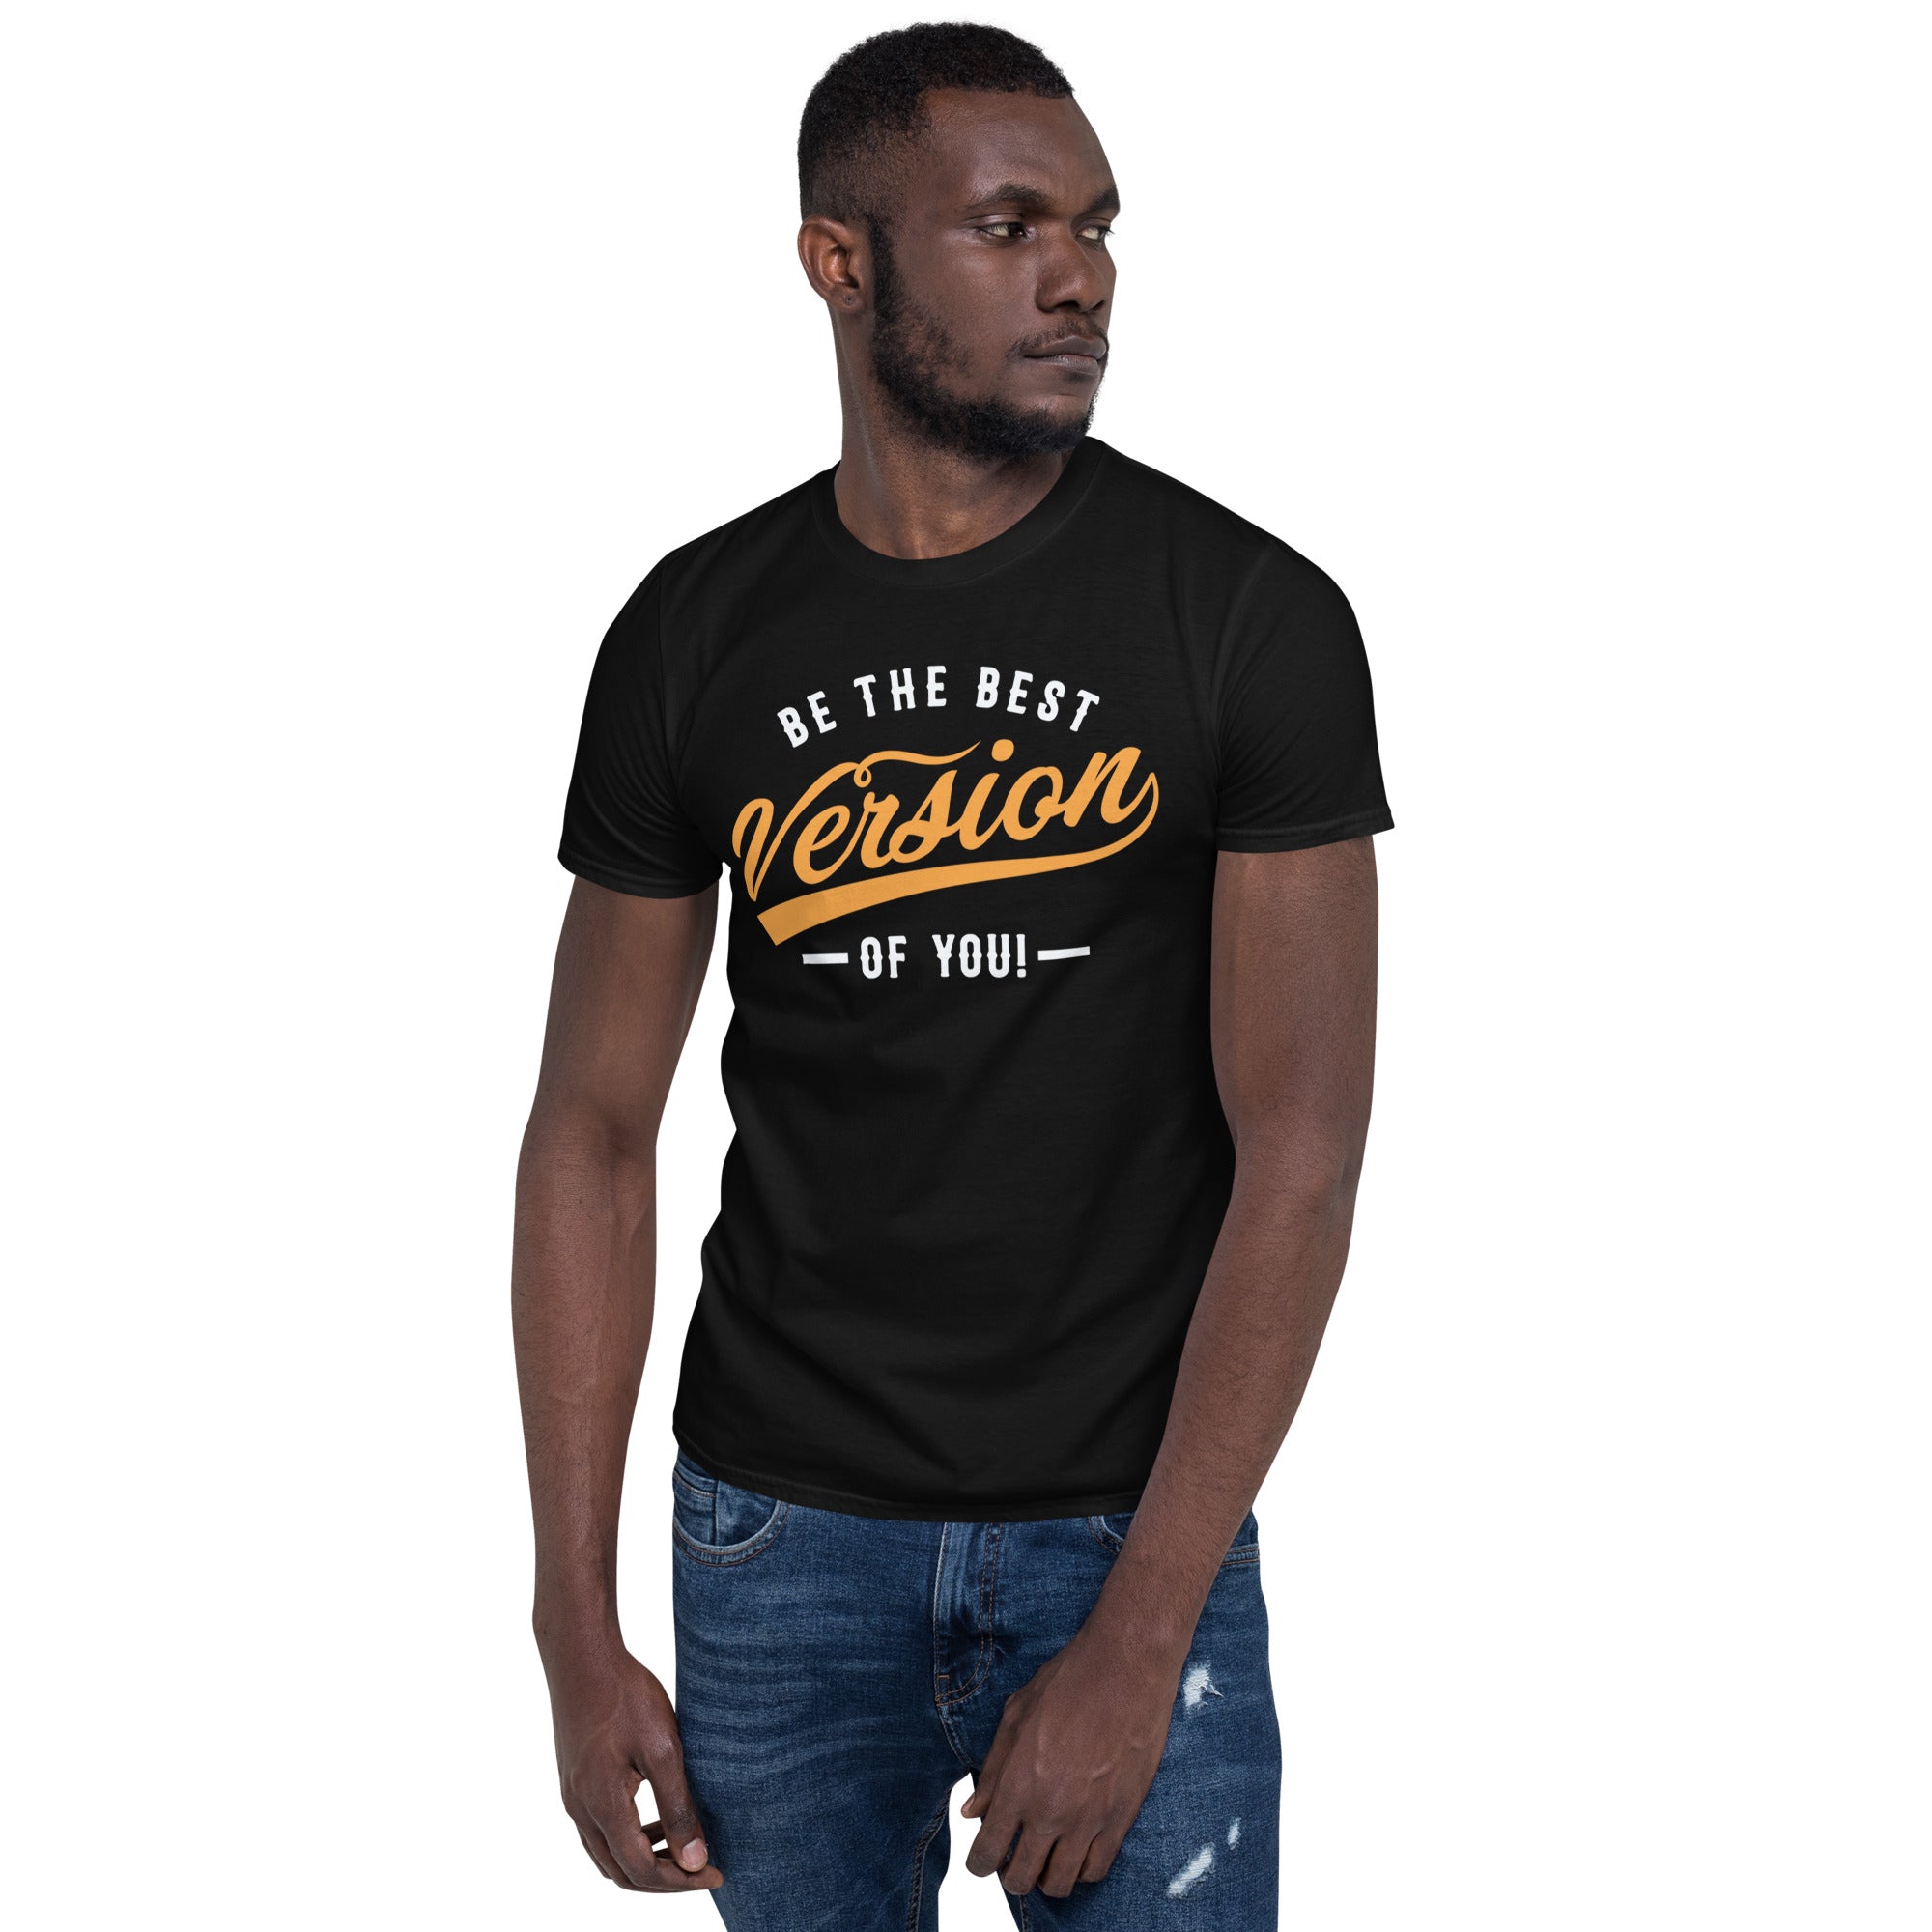 Be The Best Version Of You - Short-Sleeve Unisex T-Shirt